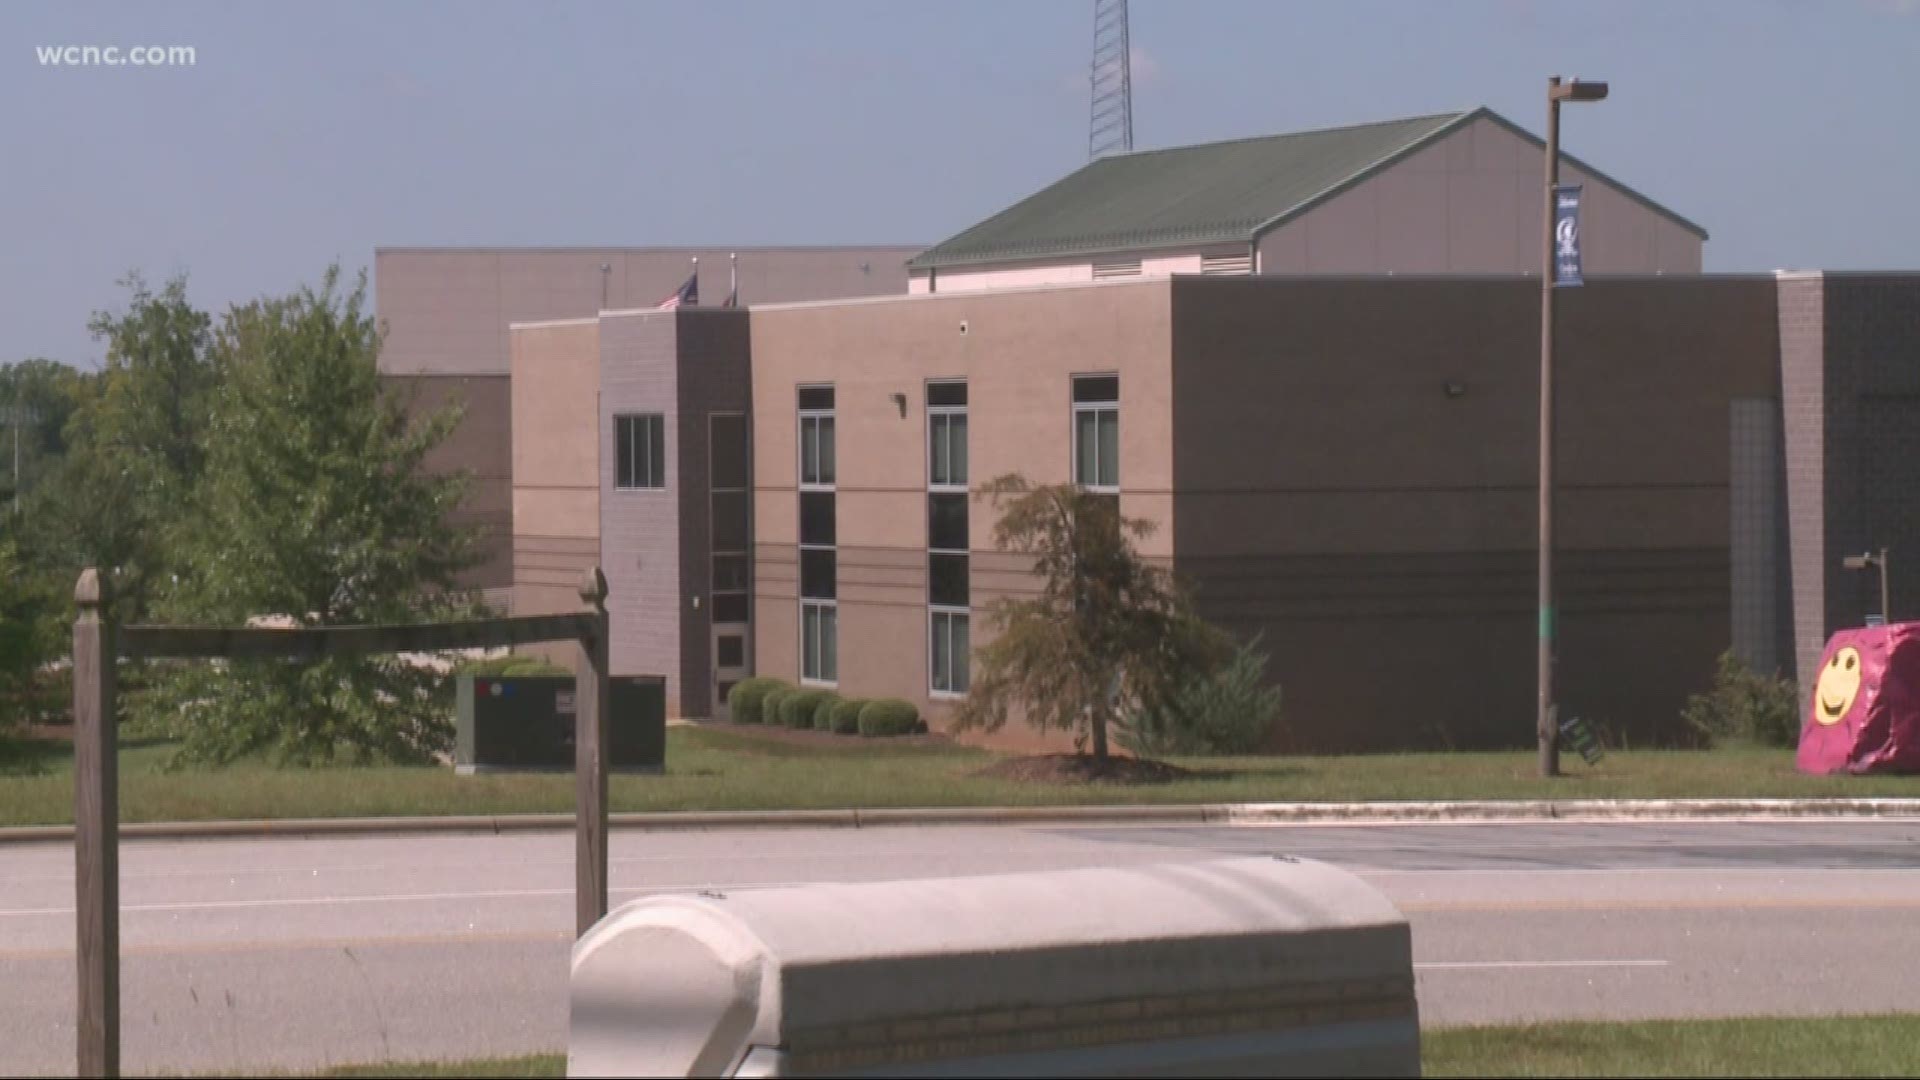 The alleged incident involves a teacher at Cuthbertson High School in Union County.